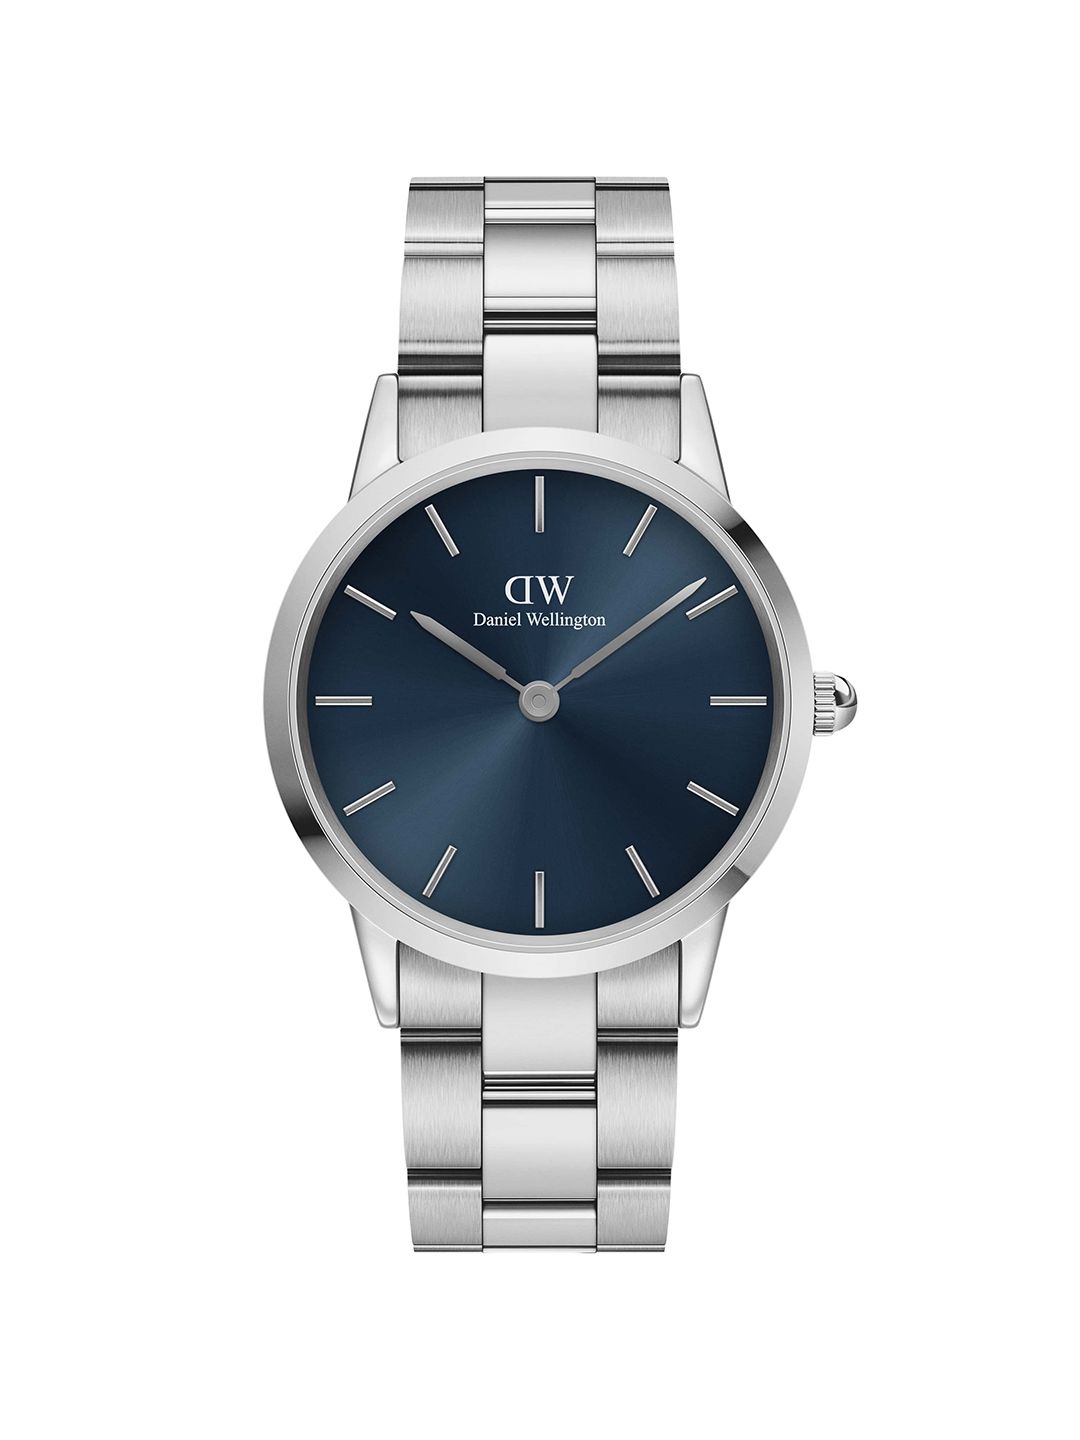 Daniel Wellington Iconic Link Artic 36mm Bracelet Style Analogue Watch DW00100458 Price in India